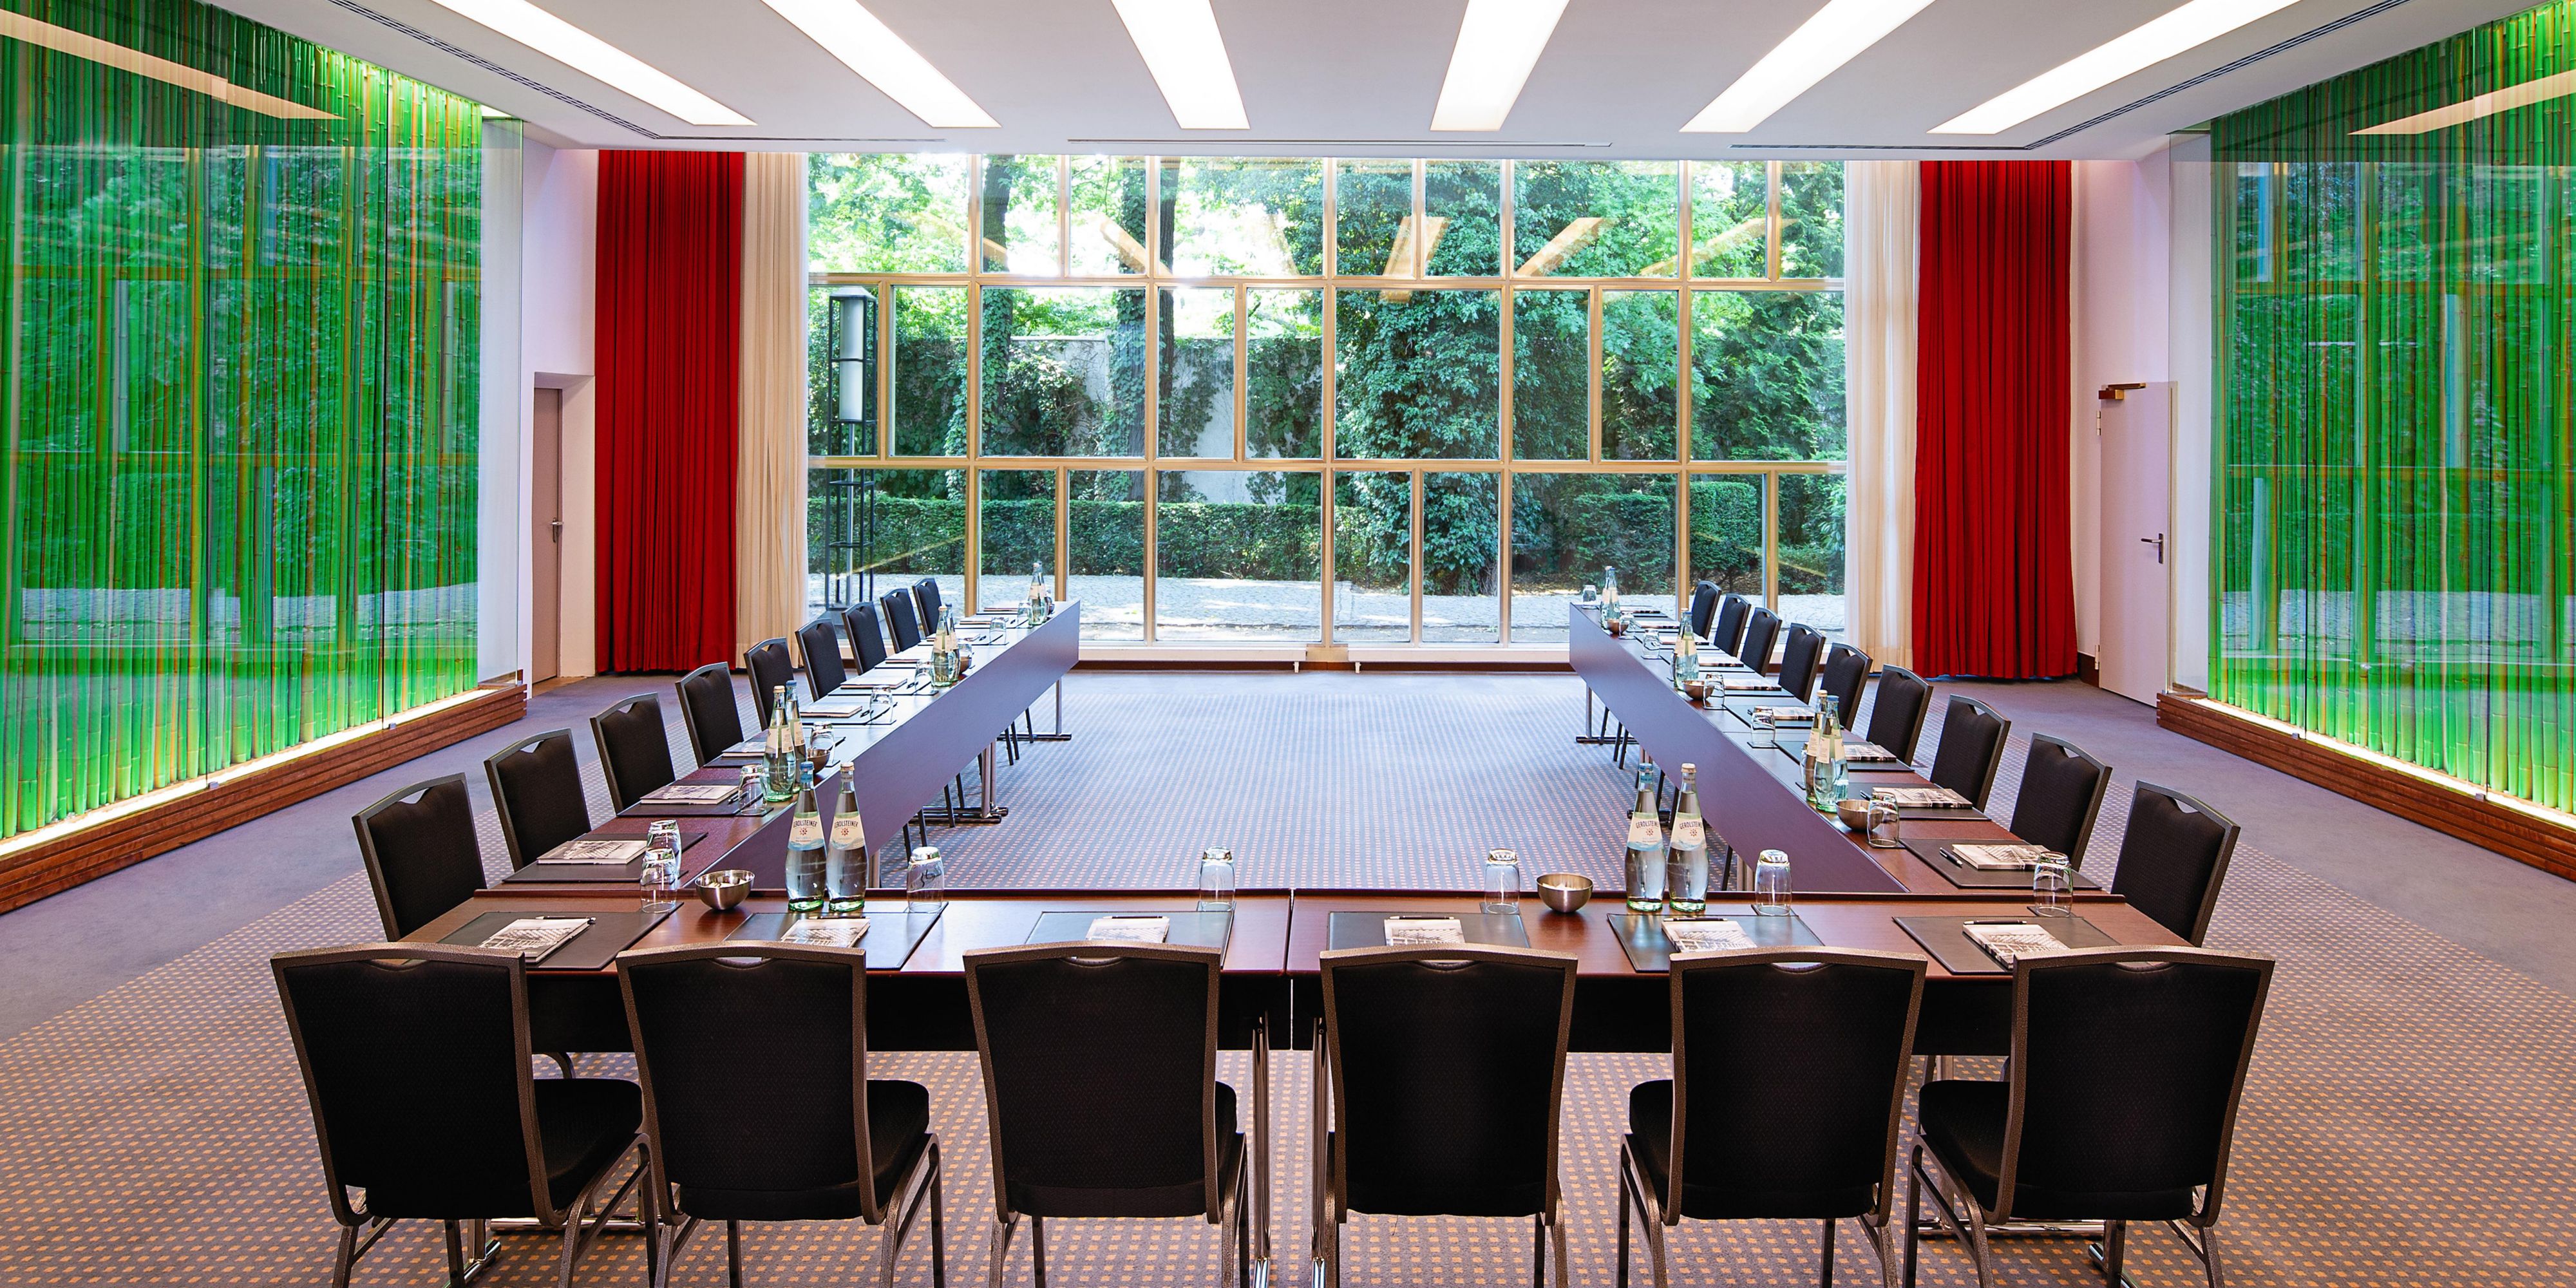 As one of the largest conference hotels in Europe, located directly at the Tiergarten in Berlin, the InterContinental Berlin offers the ideal setting for your event with 55 event rooms and a total area of 6,200 m2. With state-of-the-art technologies and a highly experienced and professional team, we have a perfect solutions for your requirements.